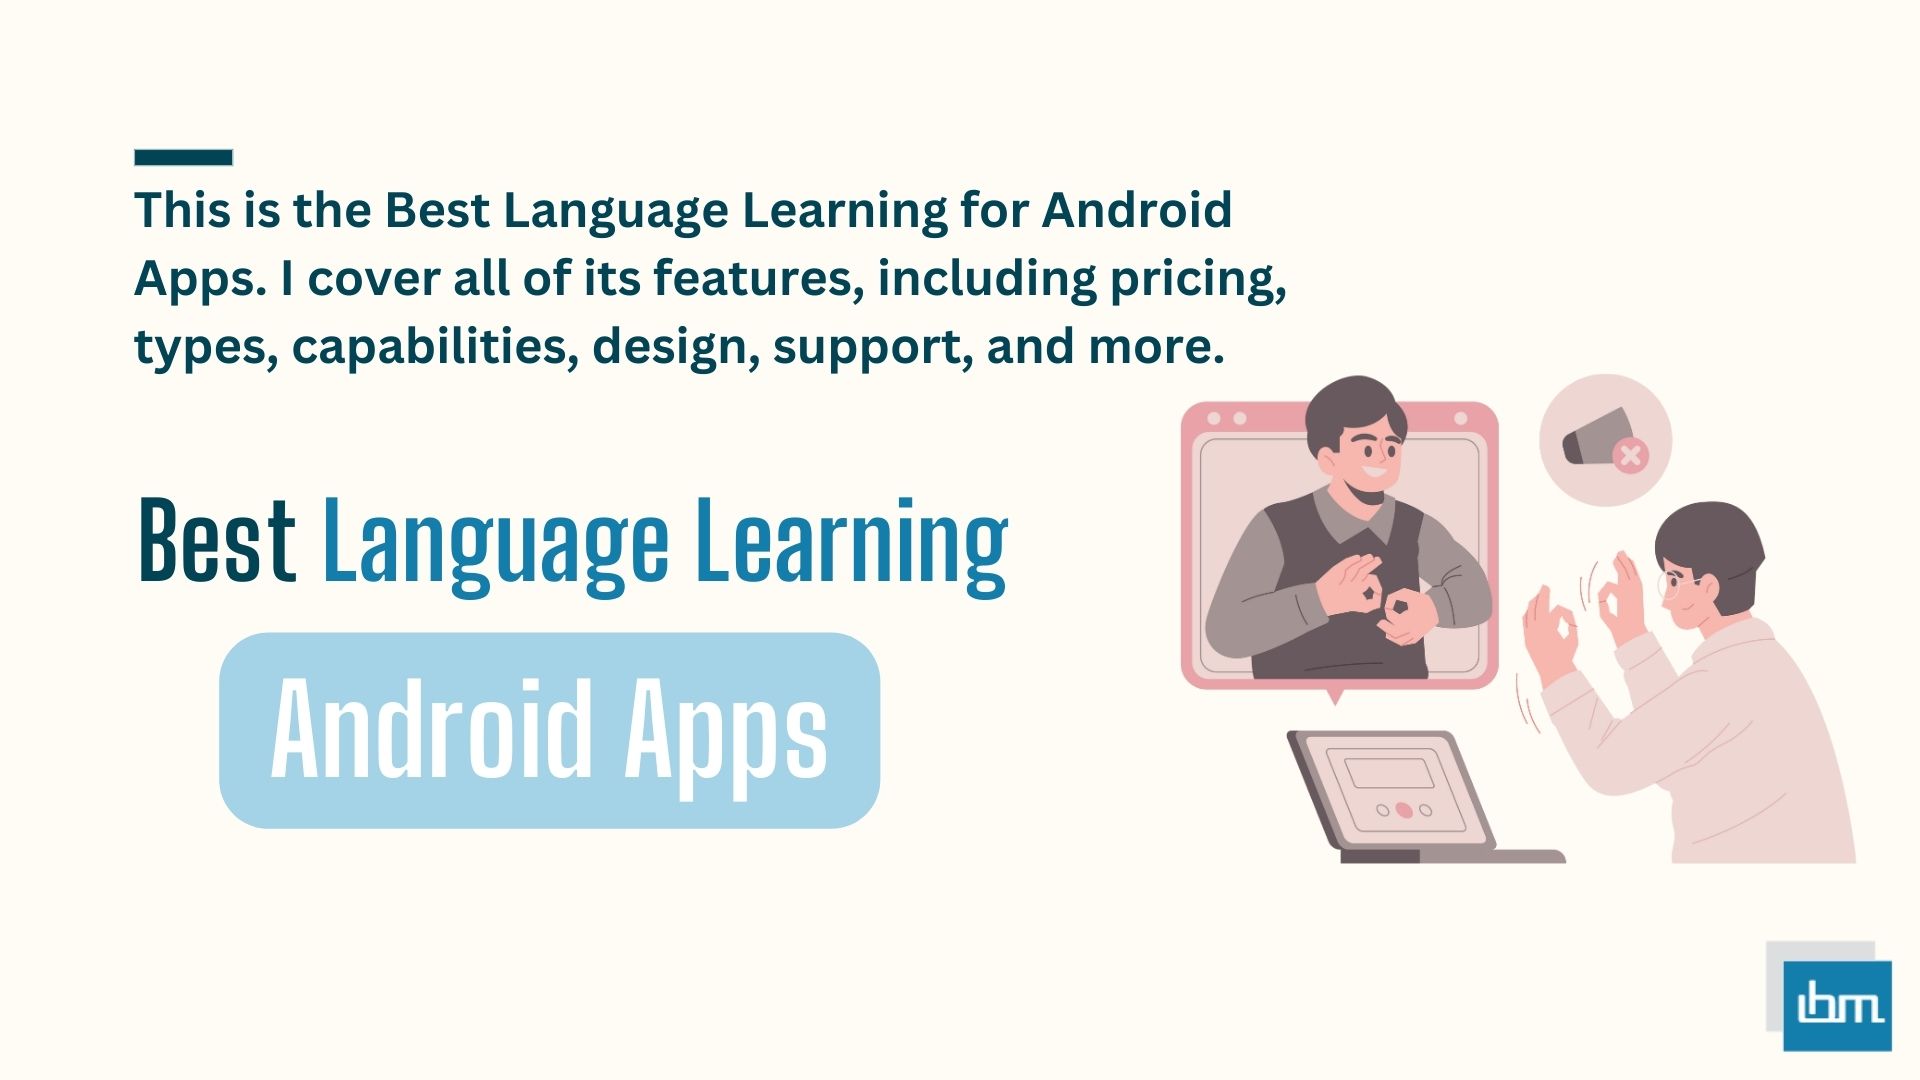 Best Language Learning for Android Apps